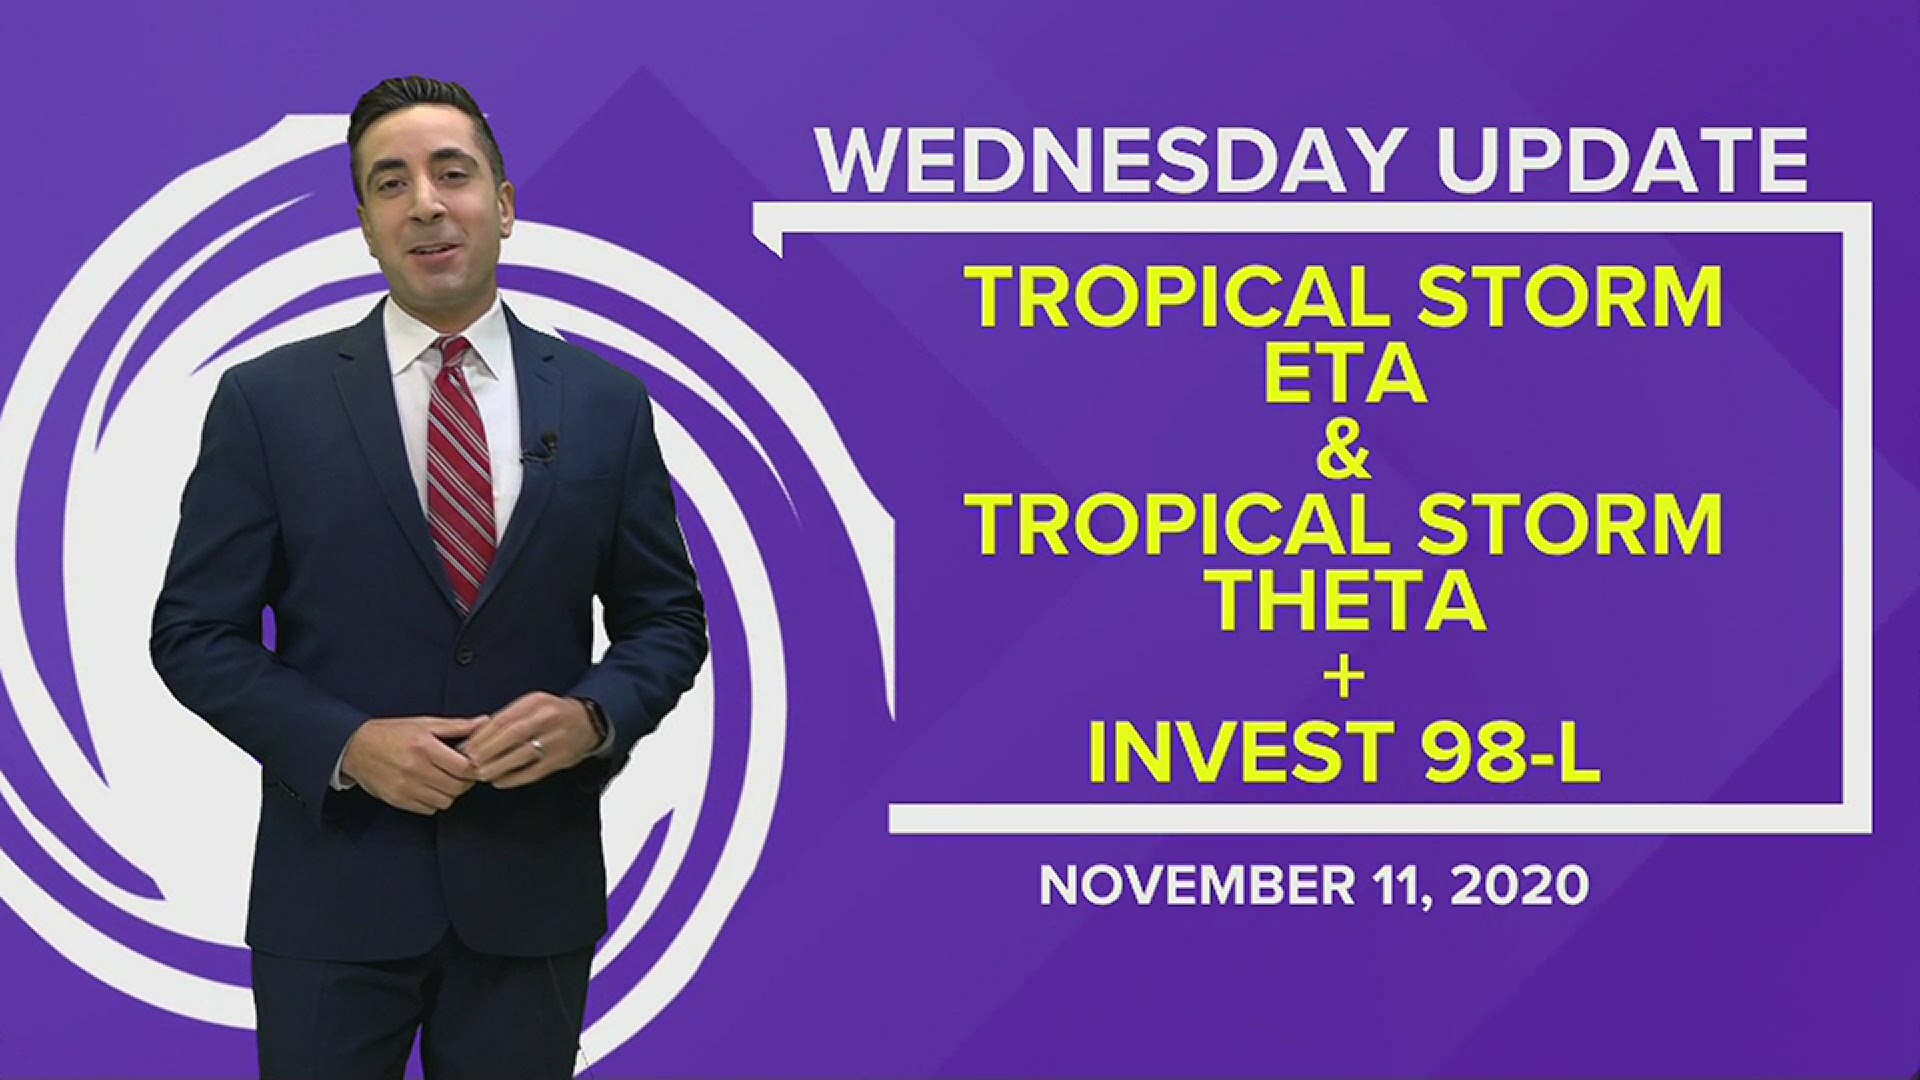 13News Now Meteorologist has the latest on Tropical Storms Eta and Theta as well as Invest 98-L churning in the Caribbean that's expected to become Iota.